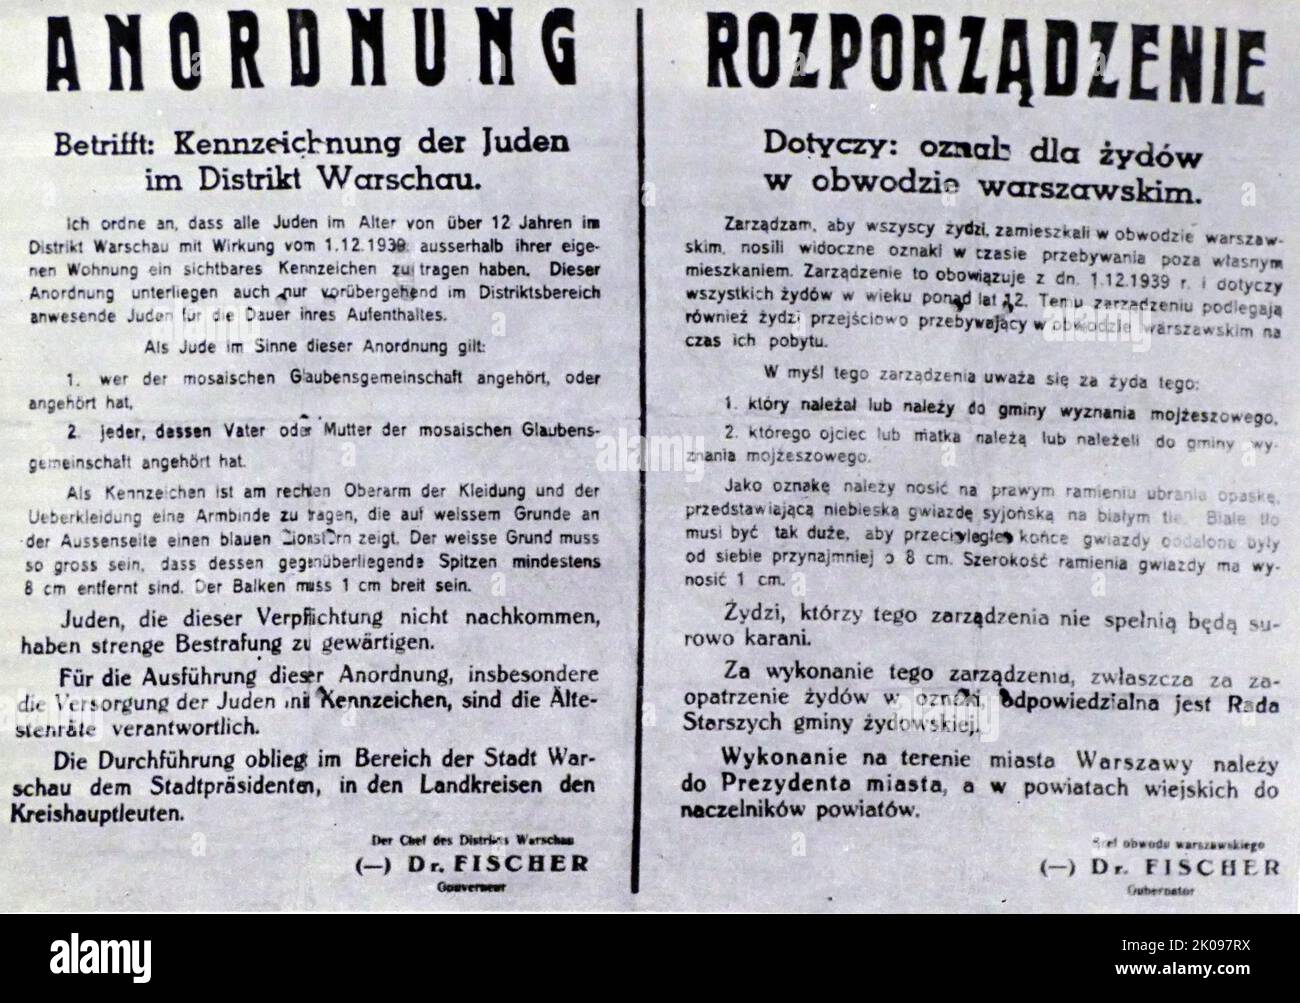 Order of the Governor of the Warsaw District, Dr Fischer, requiring Jews or of Jewish extraction to wear a special badge on their arm. Ludwig Fischer (16 April 1905 - 8 March 1947) was a German Nazi Party lawyer, politician and a convicted war criminal who was executed for war crimes. Stock Photo